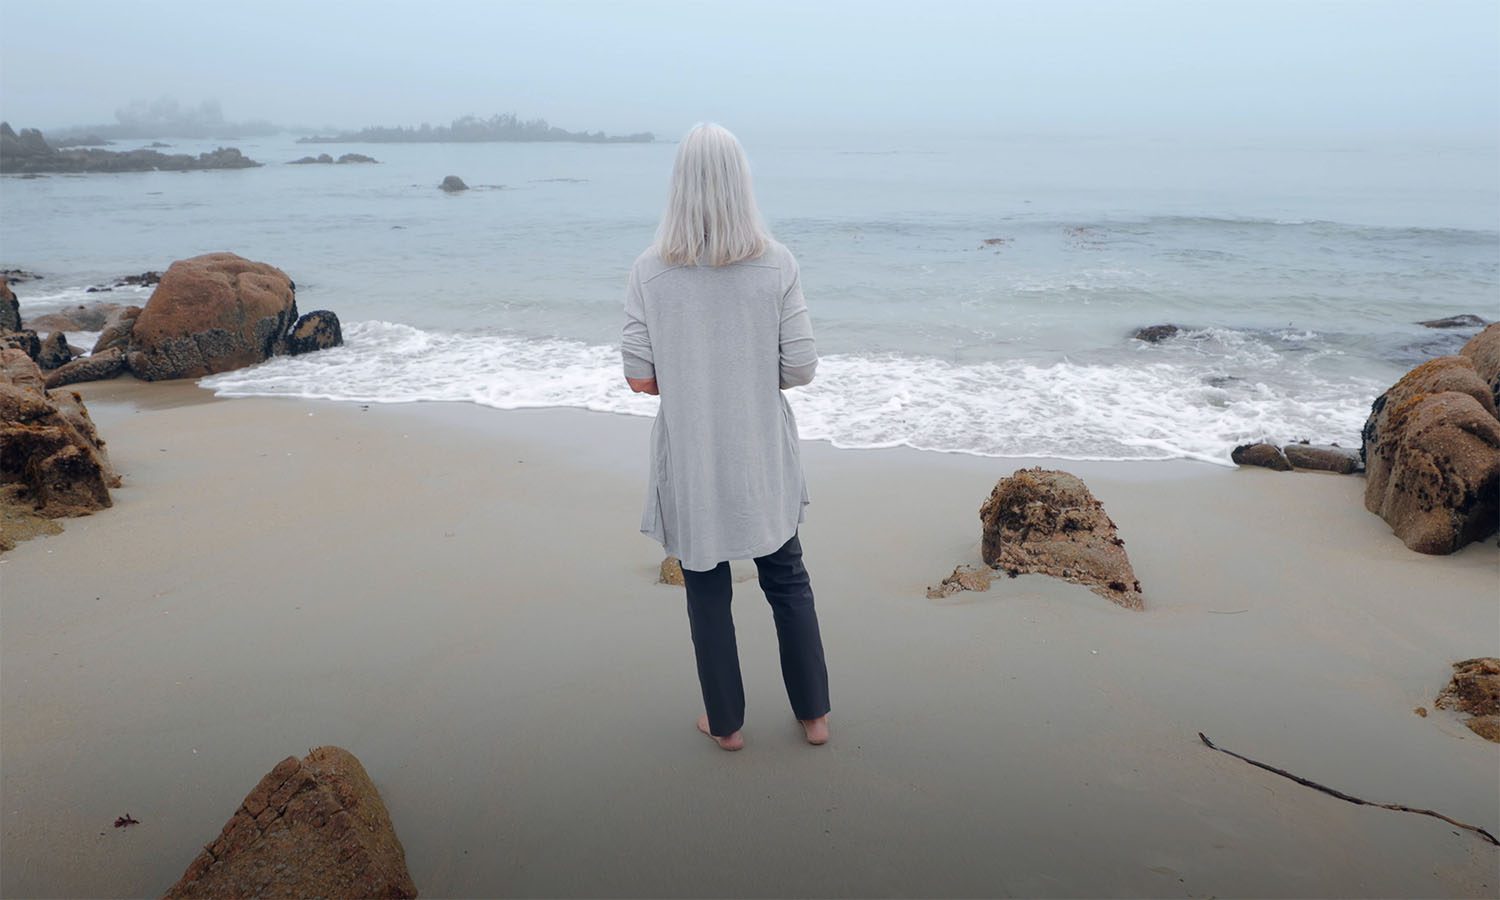 Julie Packard on a beach, staring out into the water